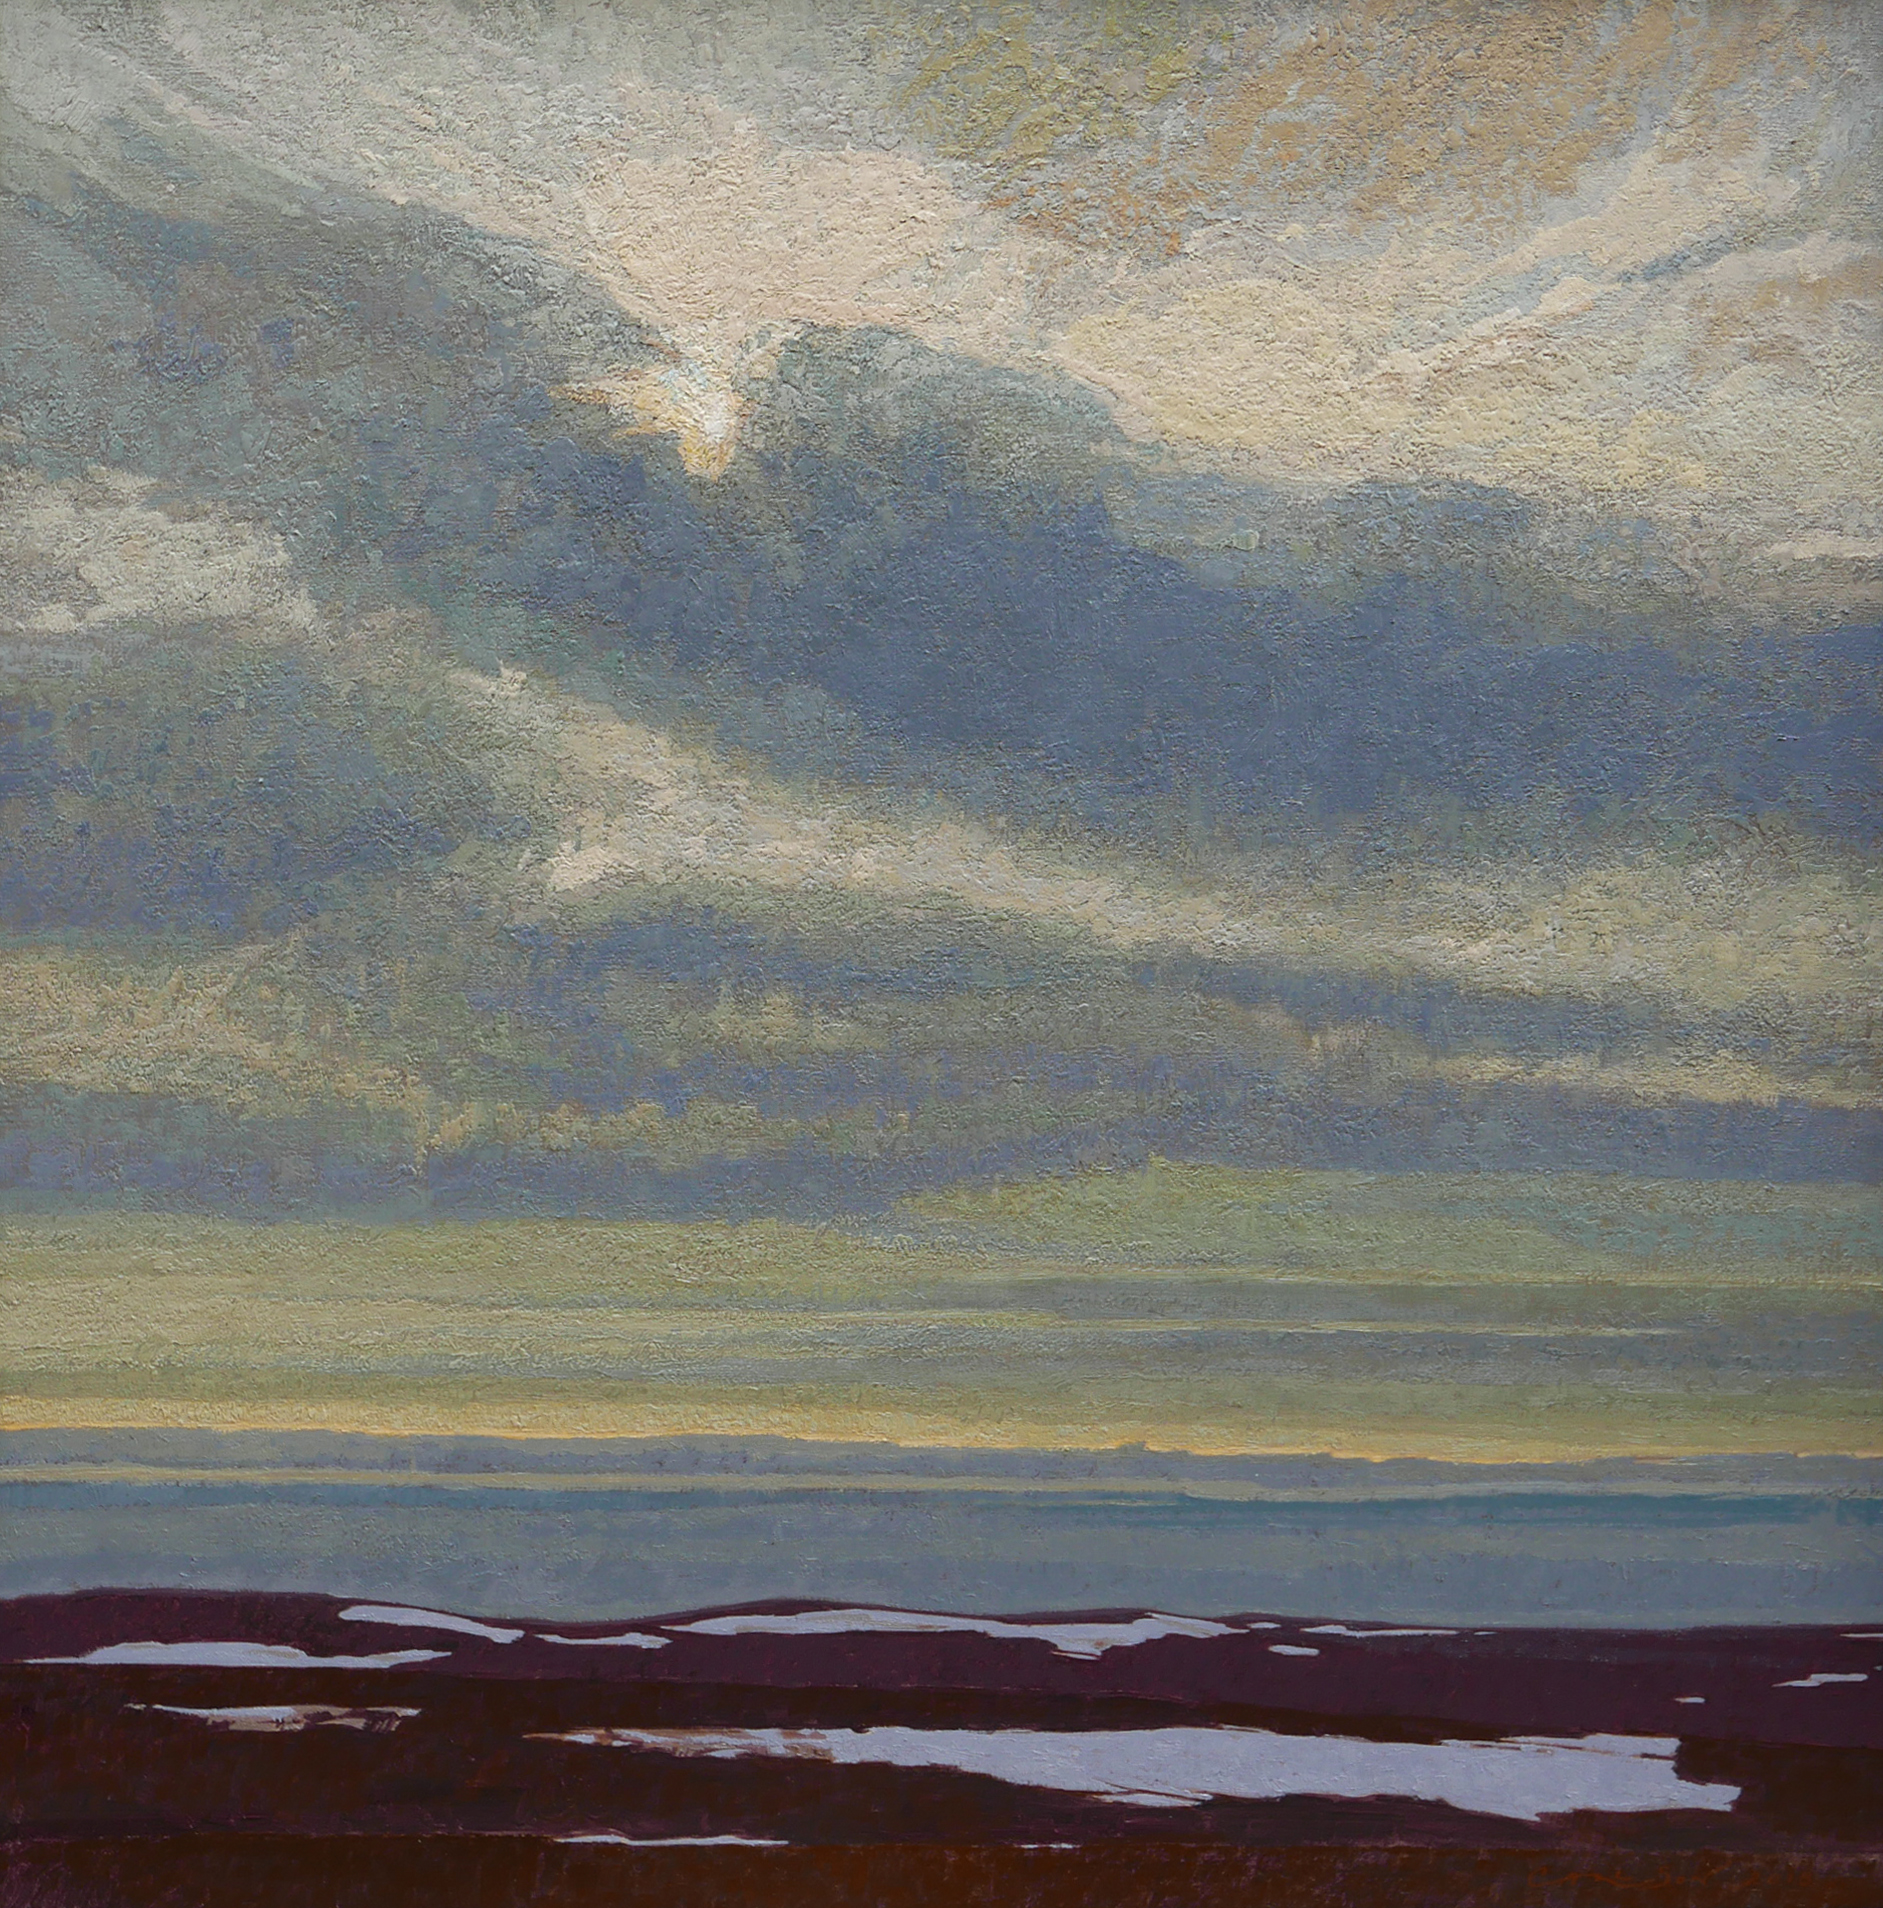 Waves of Snowdrifts by George Carlson 42 high X 42 wide, oil on linen $80,000.00